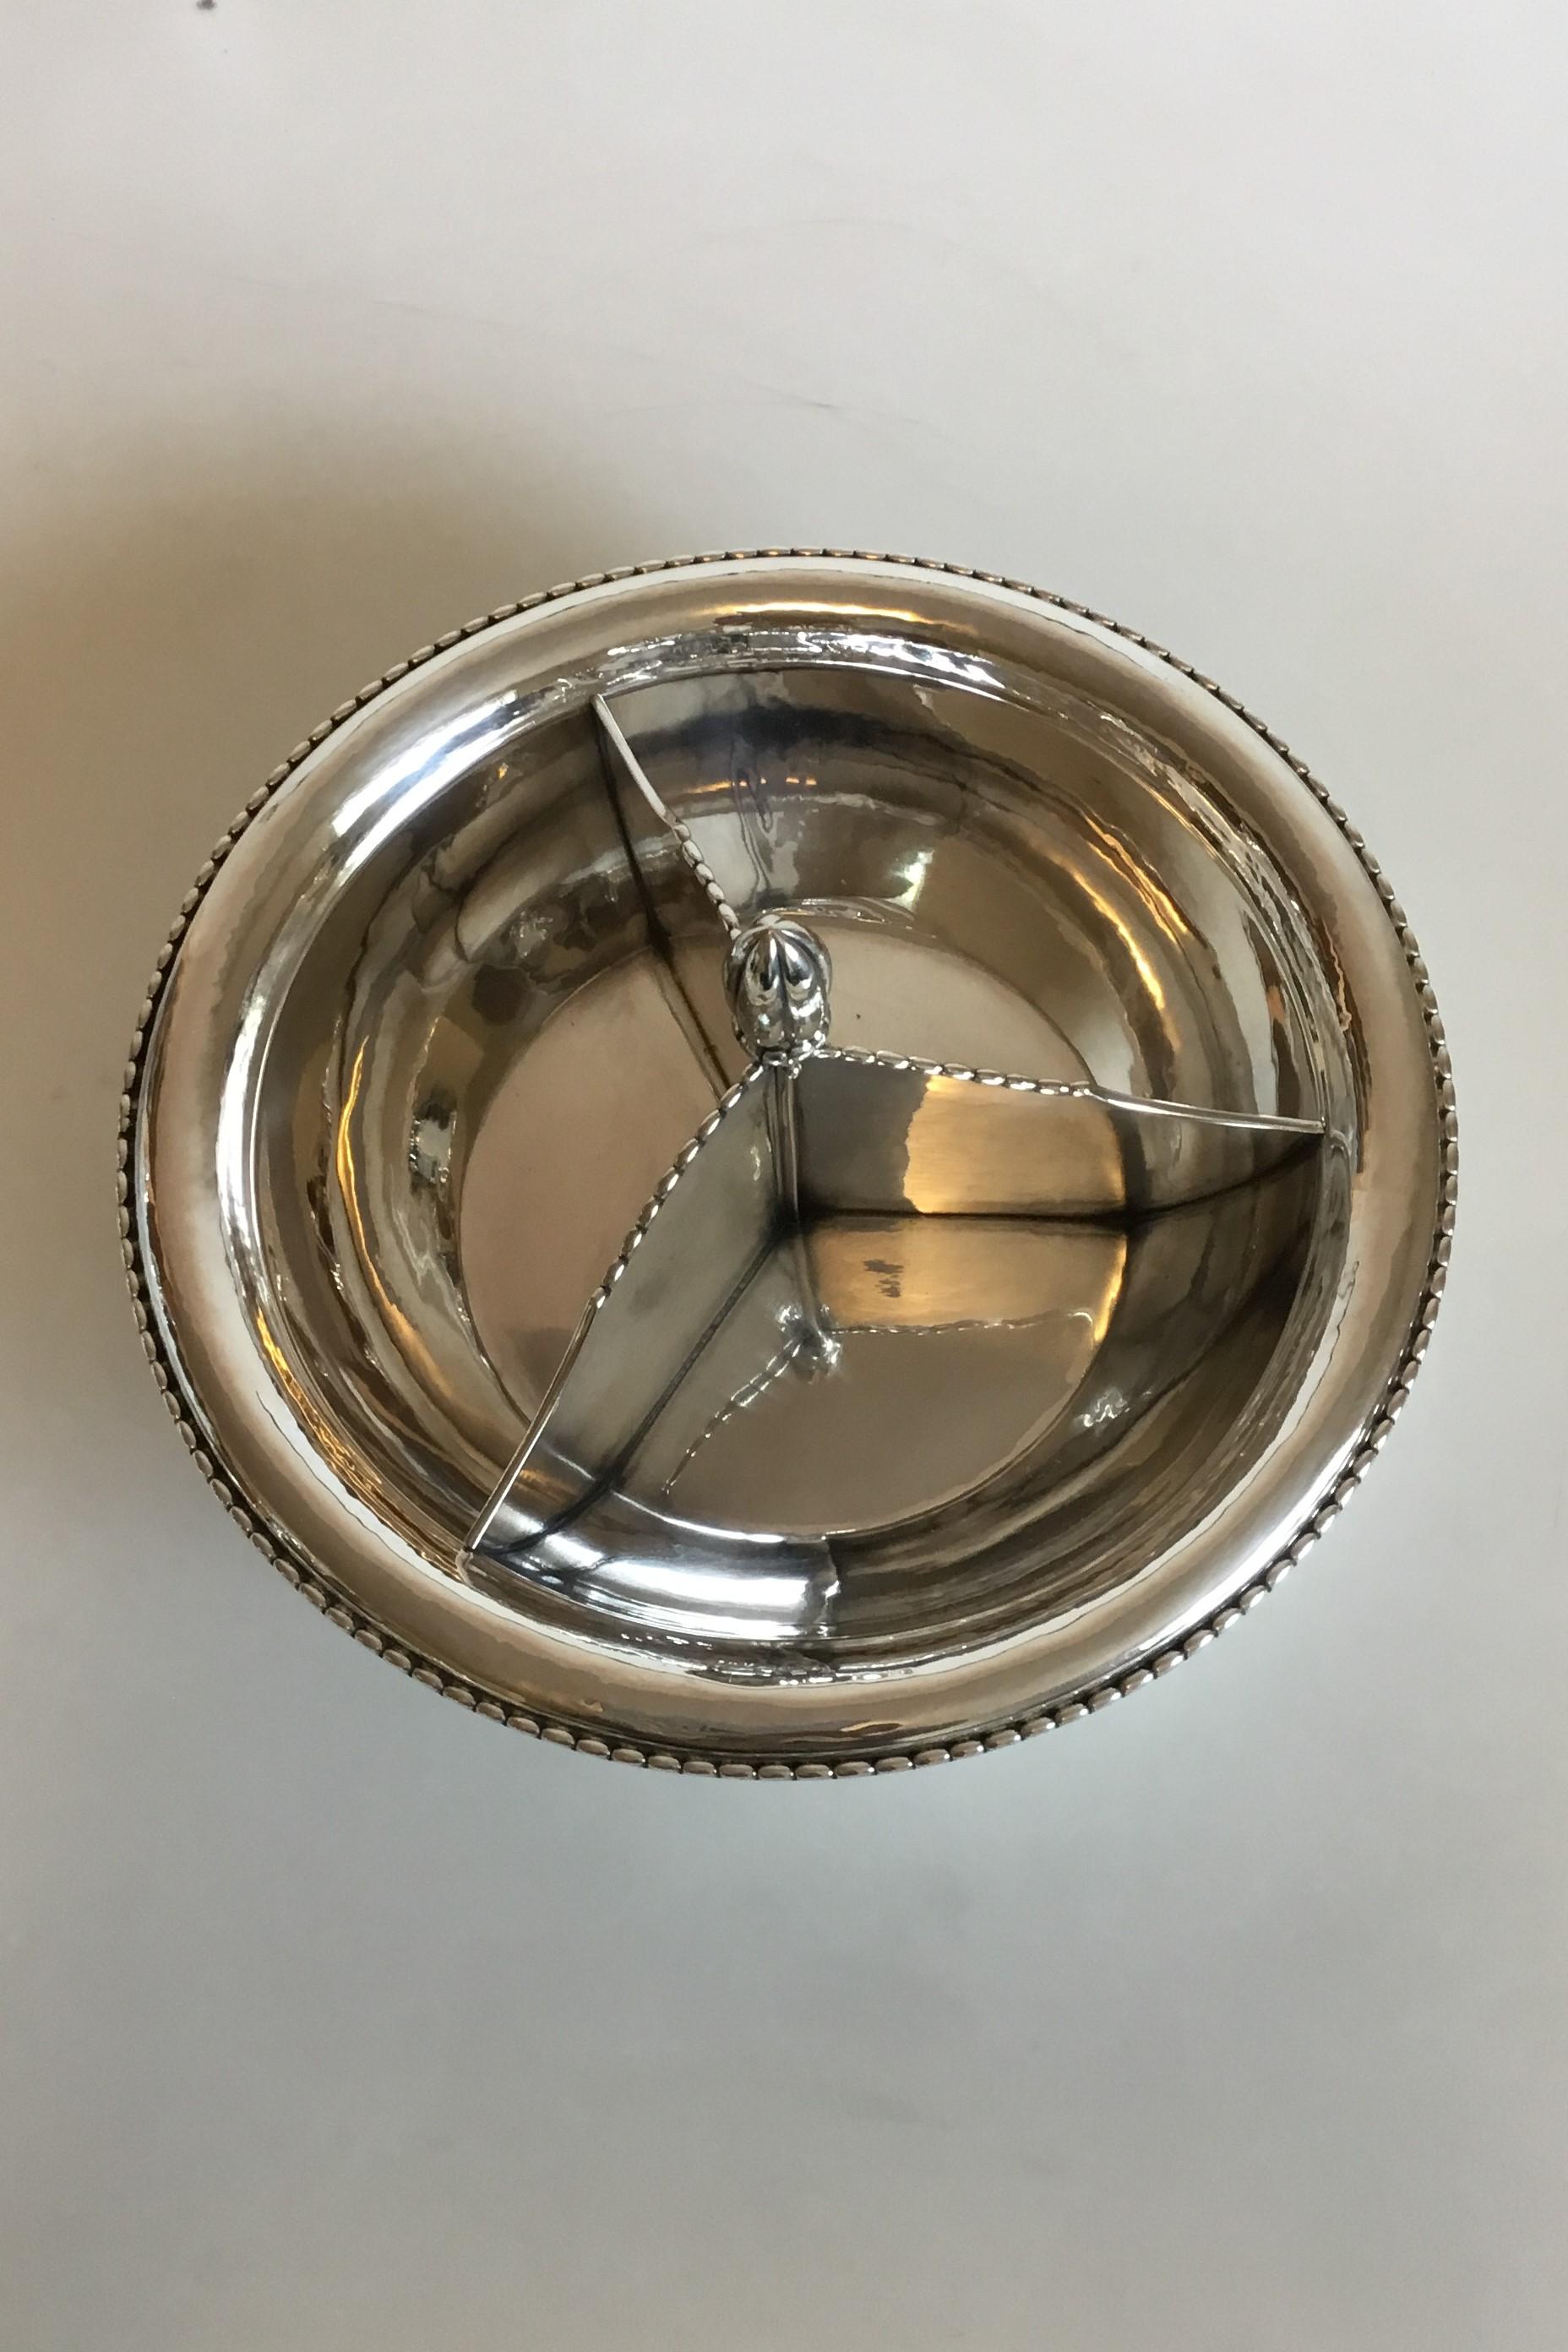 Georg Jensen sterling silver bowl with non-removable three divider No 290. Measures 12 cm / 4 23/32 in. x 26 cm / 10 15/64 in. dia. Weighs 782 g / 27.60 oz. From 1922-1933.